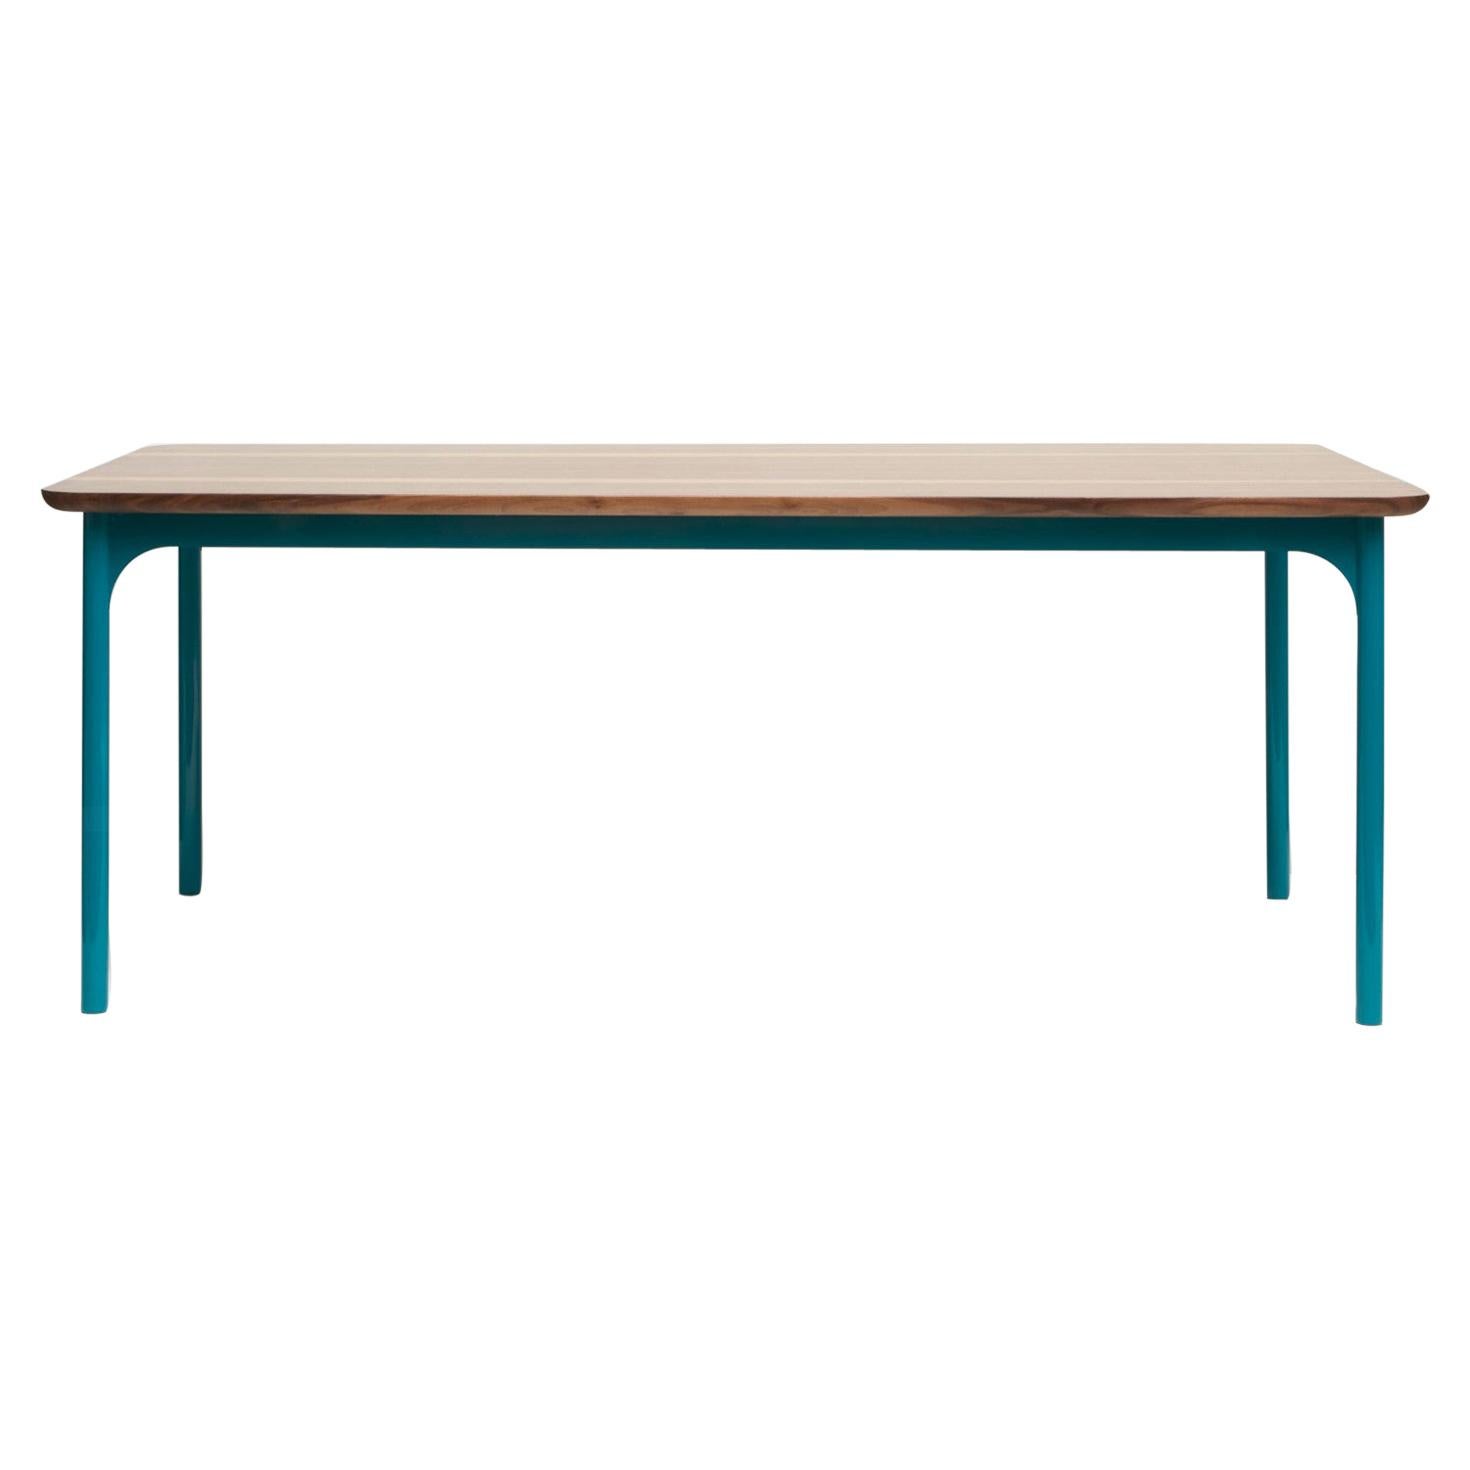 21st Century Matteo Zorzenoni Dining Table Metal Structure Wood Fillet M Scapin